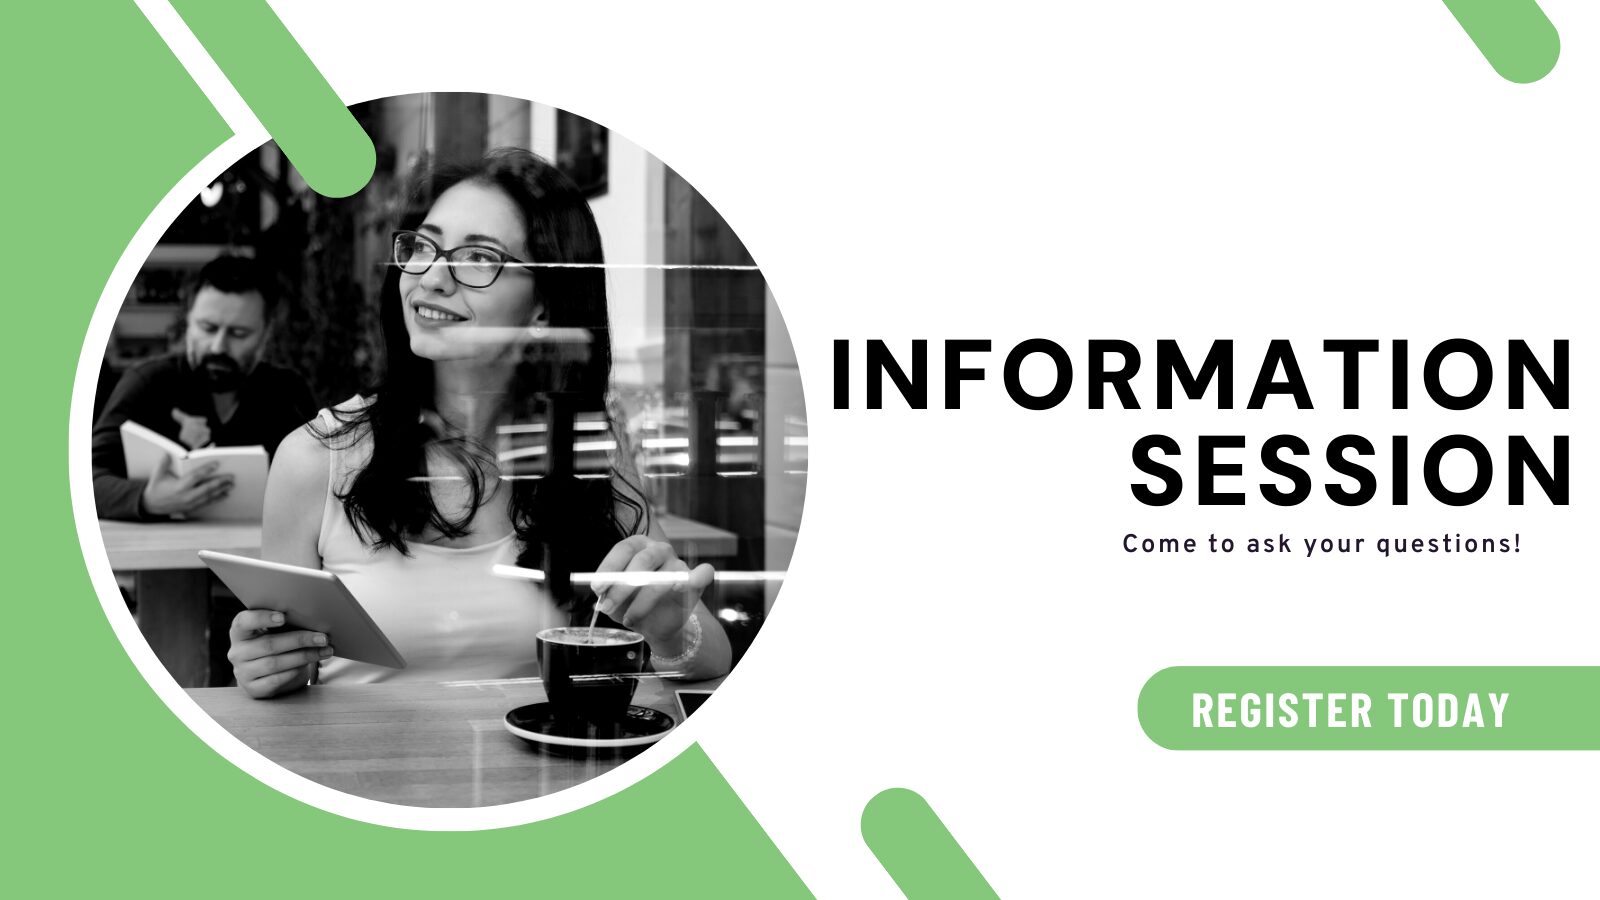 Information Session title with photo of person sitting with a laptop computer and a coffee. A register now button.